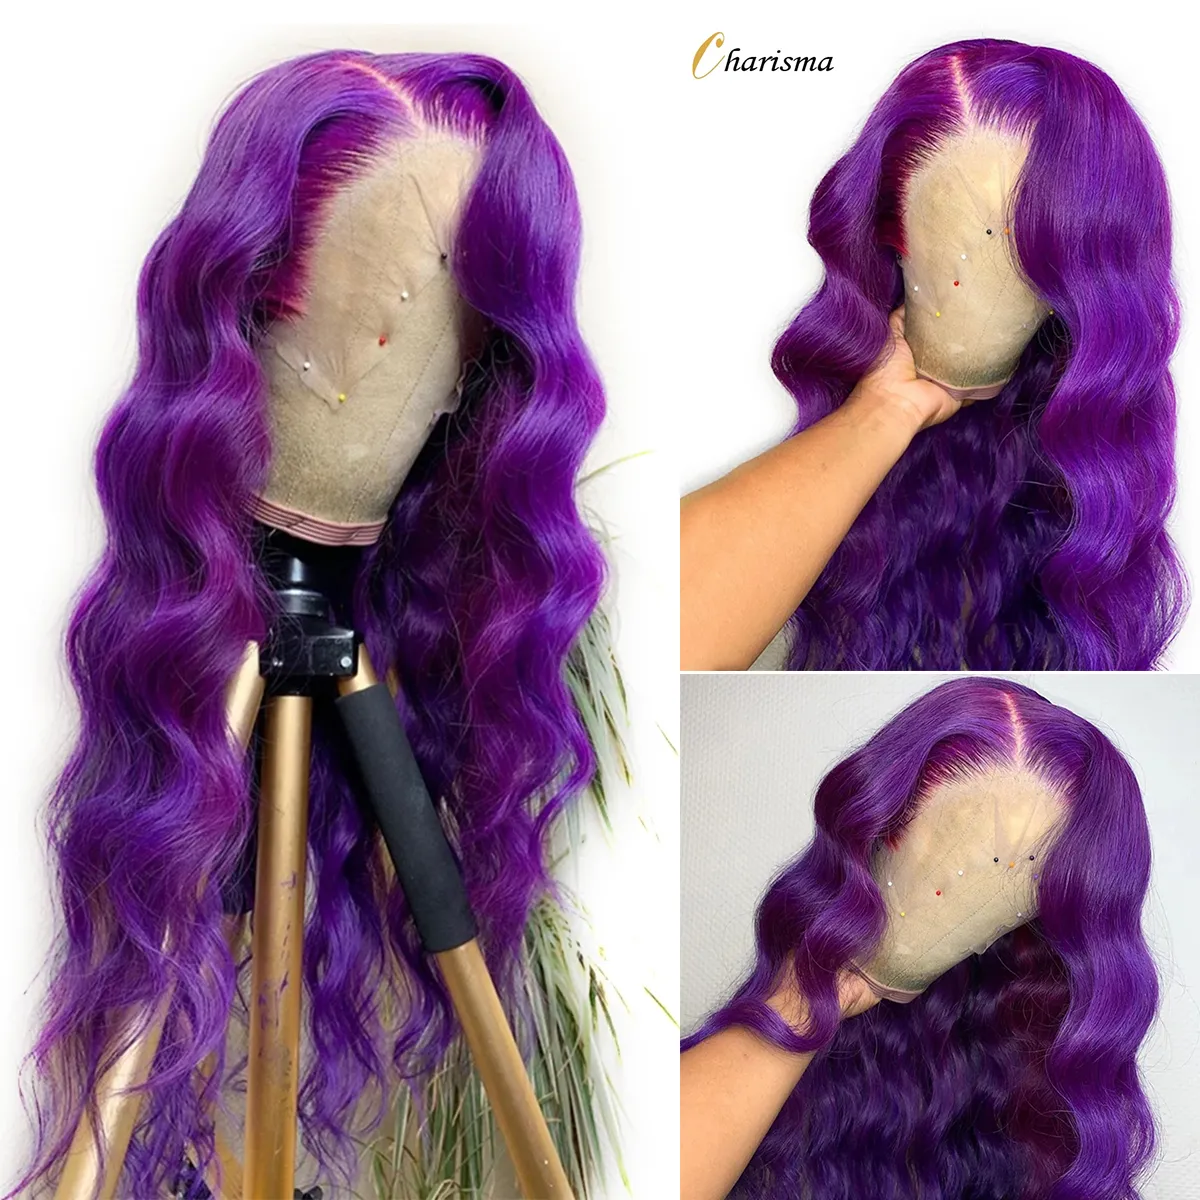 Long Body Wave Lace Front Wig Purple Color Side Part Synthetic Wigs for Black/White Women With Natural Hairline